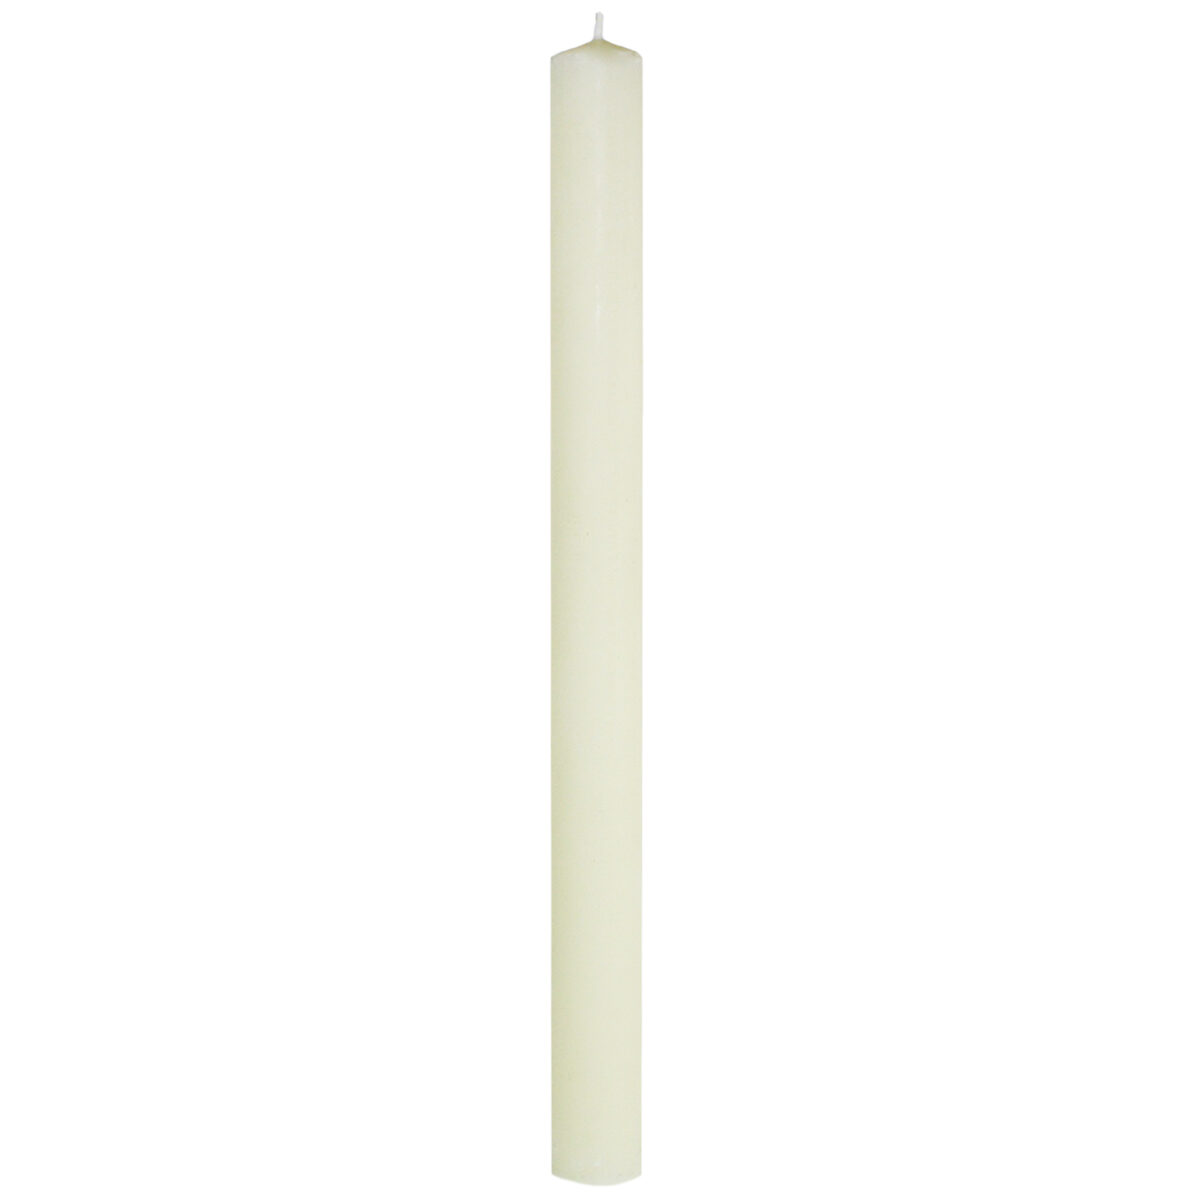 51% Beeswax 1-1/2" x 25-1/2" Plain End Candle Stick